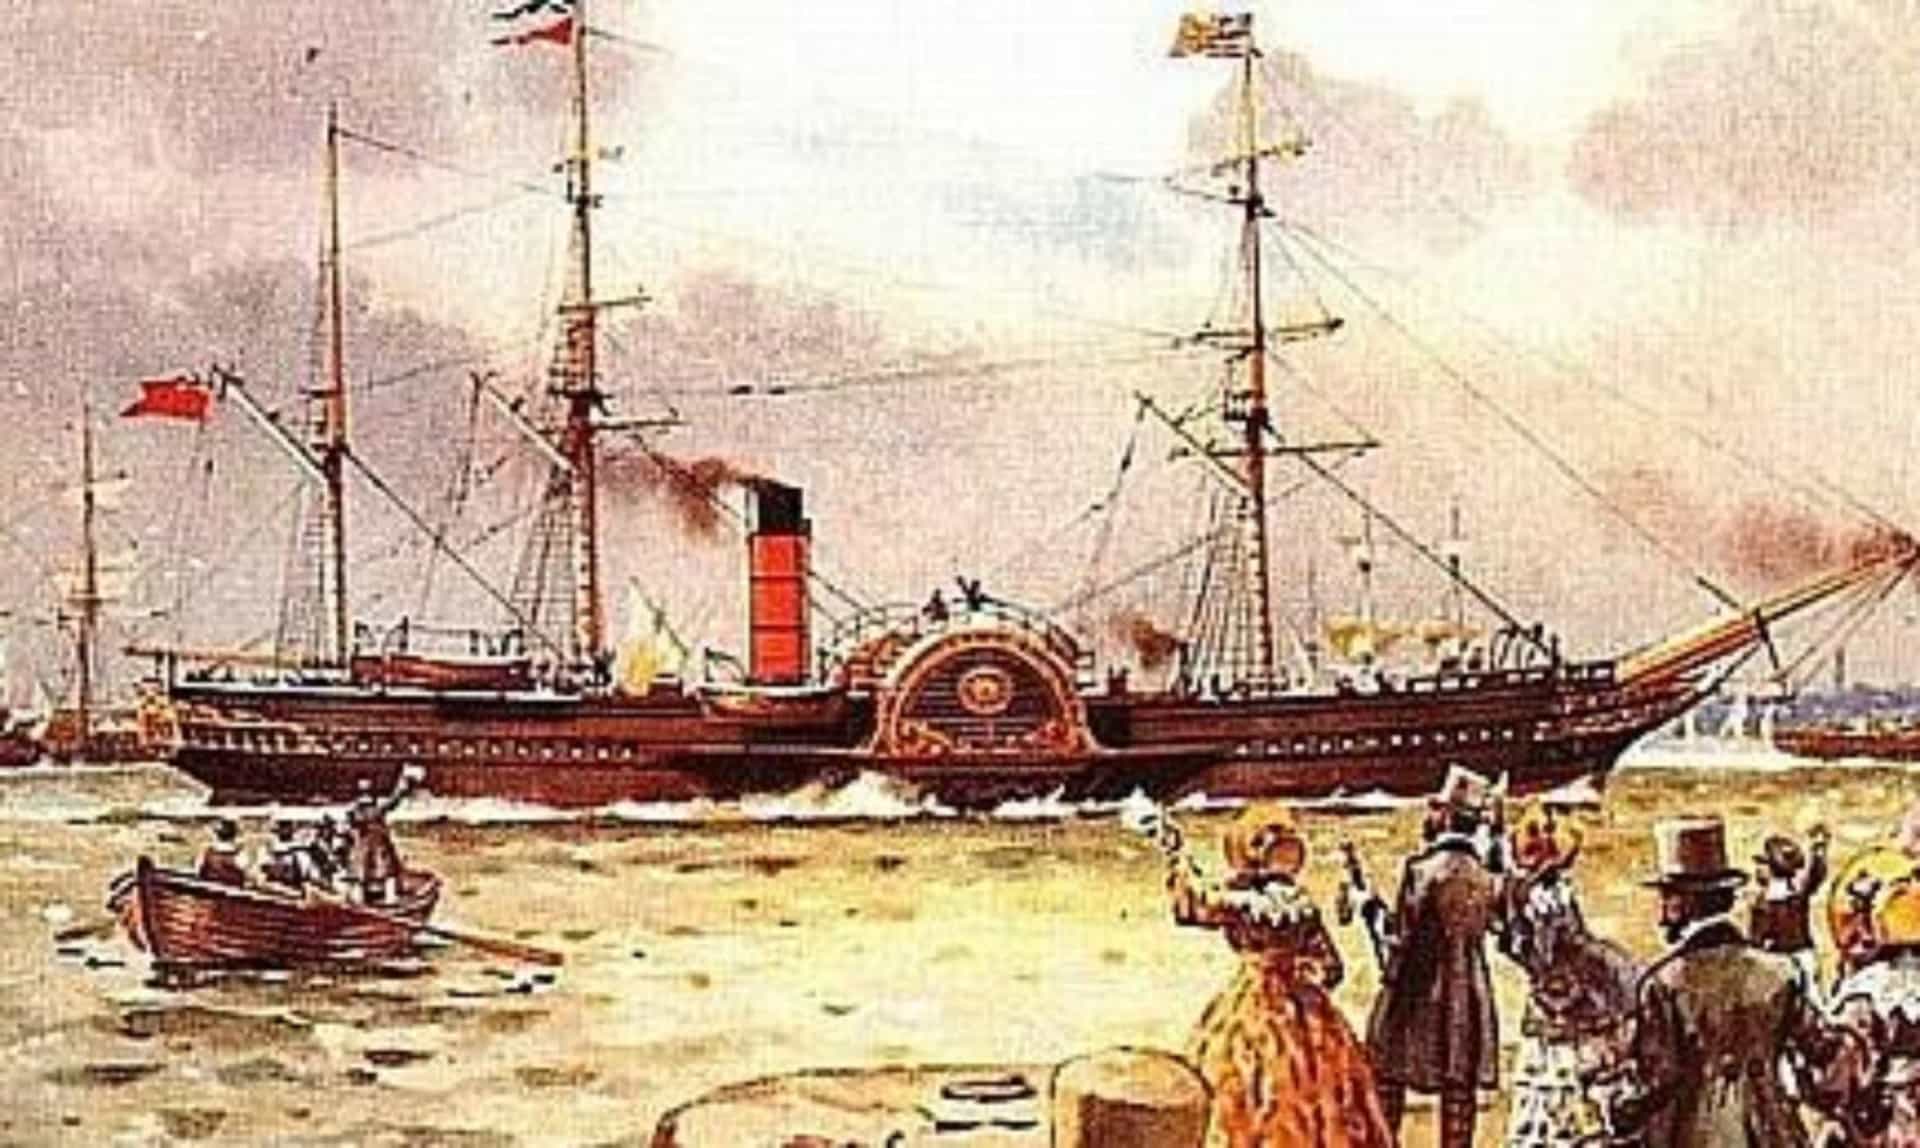 <p>The <em>Britannia</em> class was the Cunard Line's initial fleet of wooden paddlers that established the first year-round scheduled Atlantic steamship service in 1840. Pictured is RMS <em>Britannia</em>.</p><p><a href="https://www.msn.com/en-za/community/channel/vid-7xx8mnucu55yw63we9va2gwr7uihbxwc68fxqp25x6tg4ftibpra?cvid=94631541bc0f4f89bfd59158d696ad7e">Follow us and access great exclusive content every day</a></p>